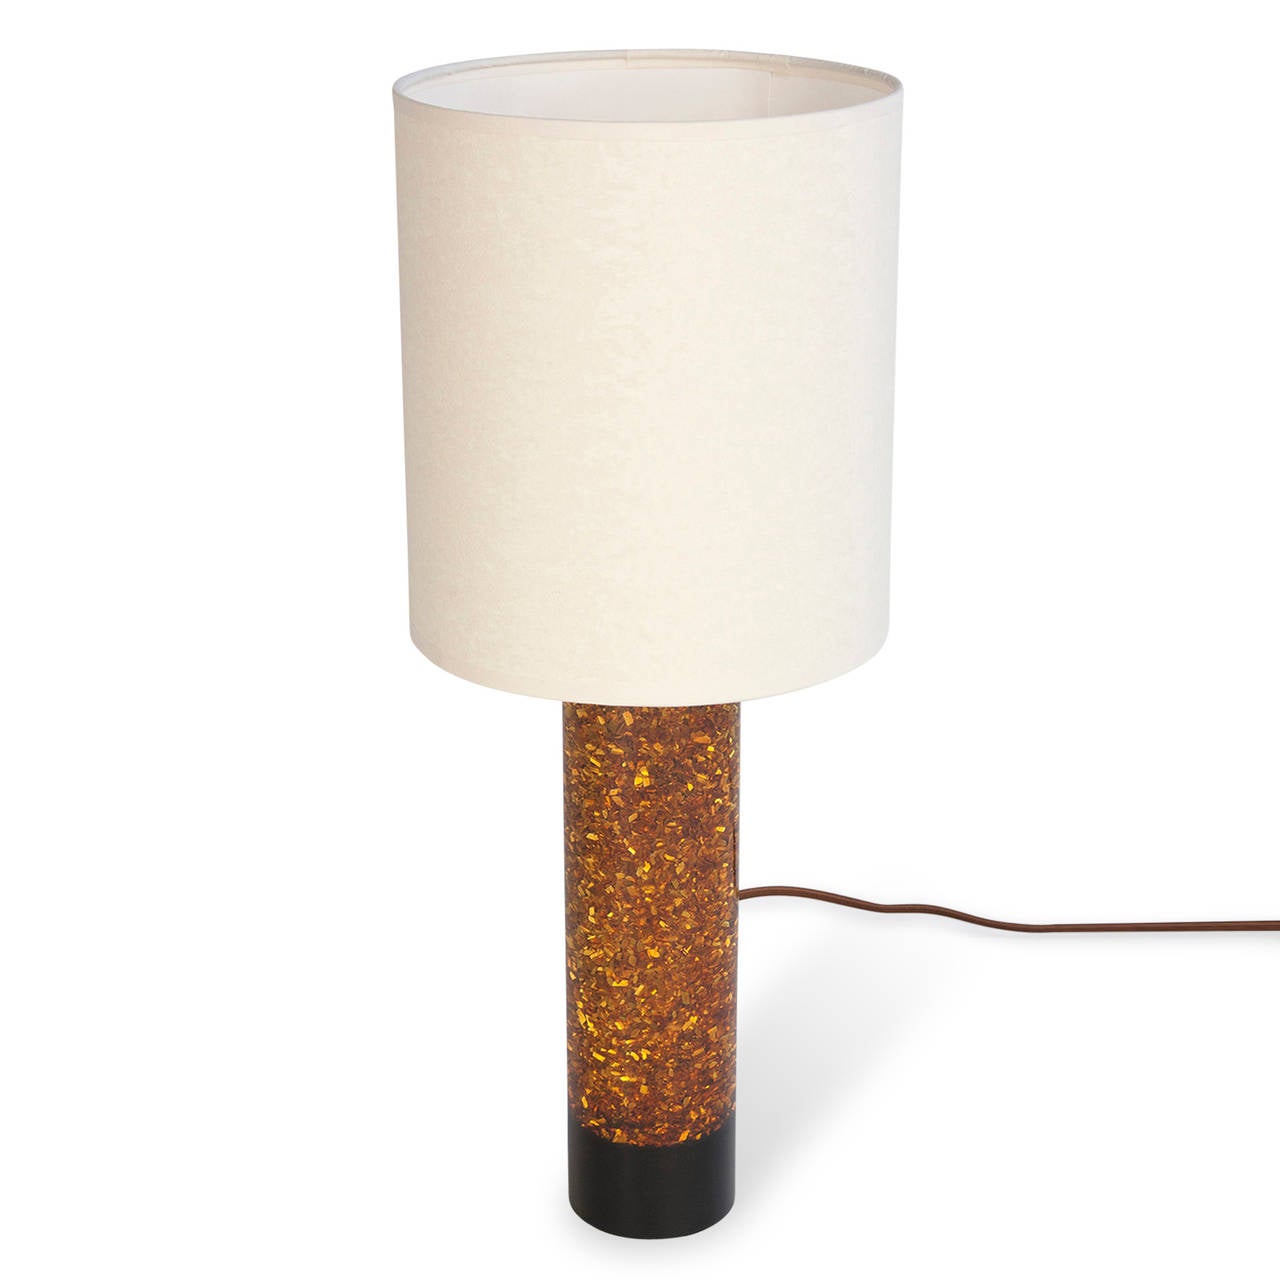 Orange speckled resin column table lamp, with black resin band at base, French 1970s. In custom paper shade. Overall height 20 1/2 in, diameter of base 3 in. Shade measures top diameter 8 in, bottom diameter 9 in, height 8 1/2 in. (Item #1786)